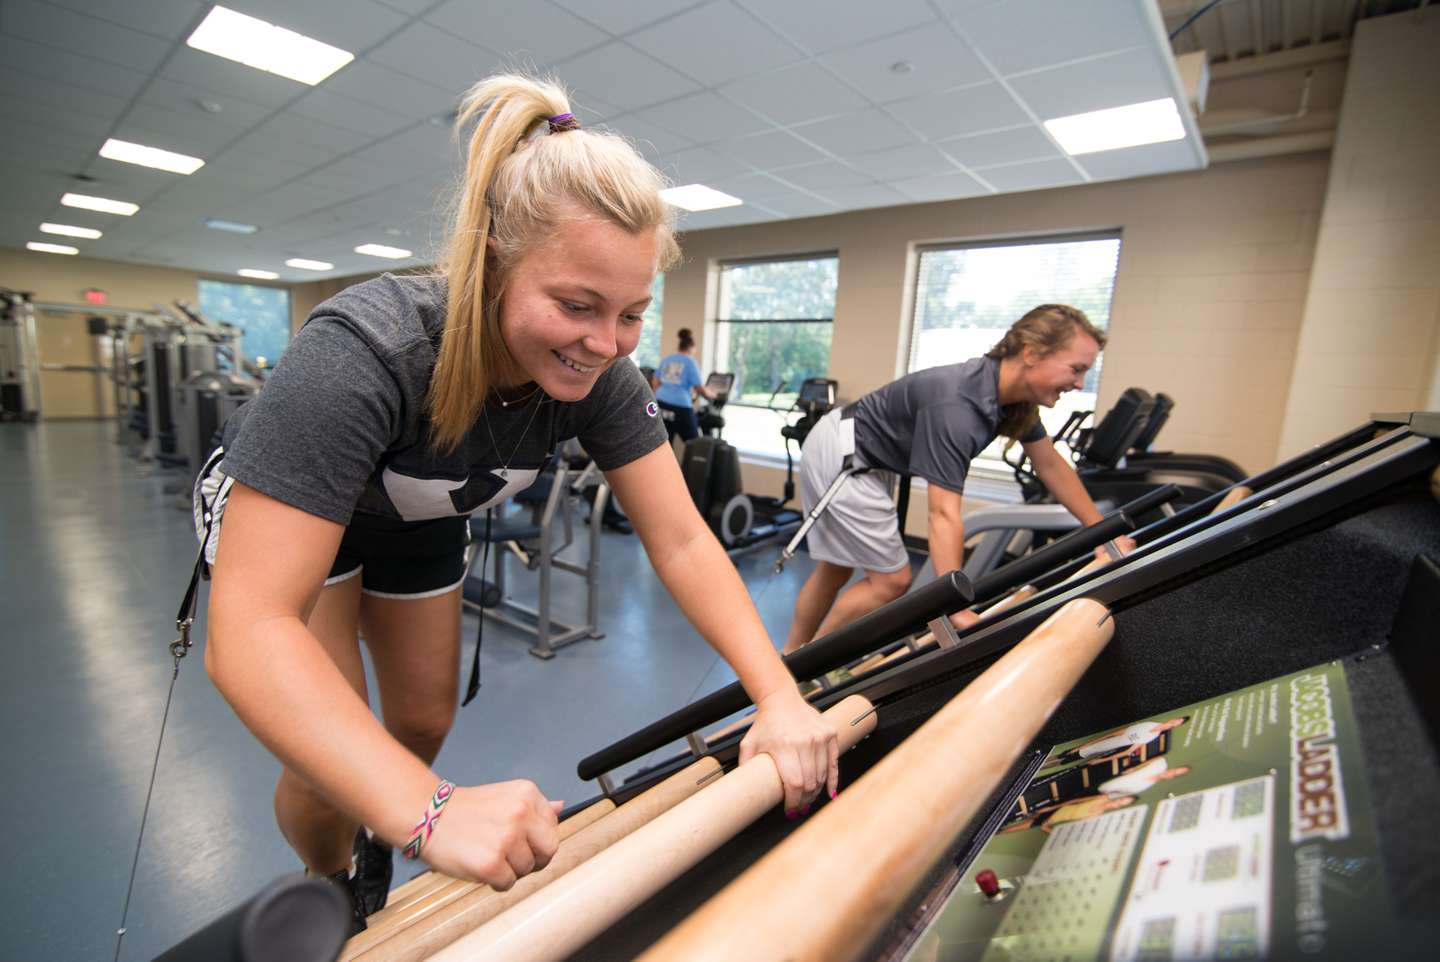 Two female students work out together in the fitness center.